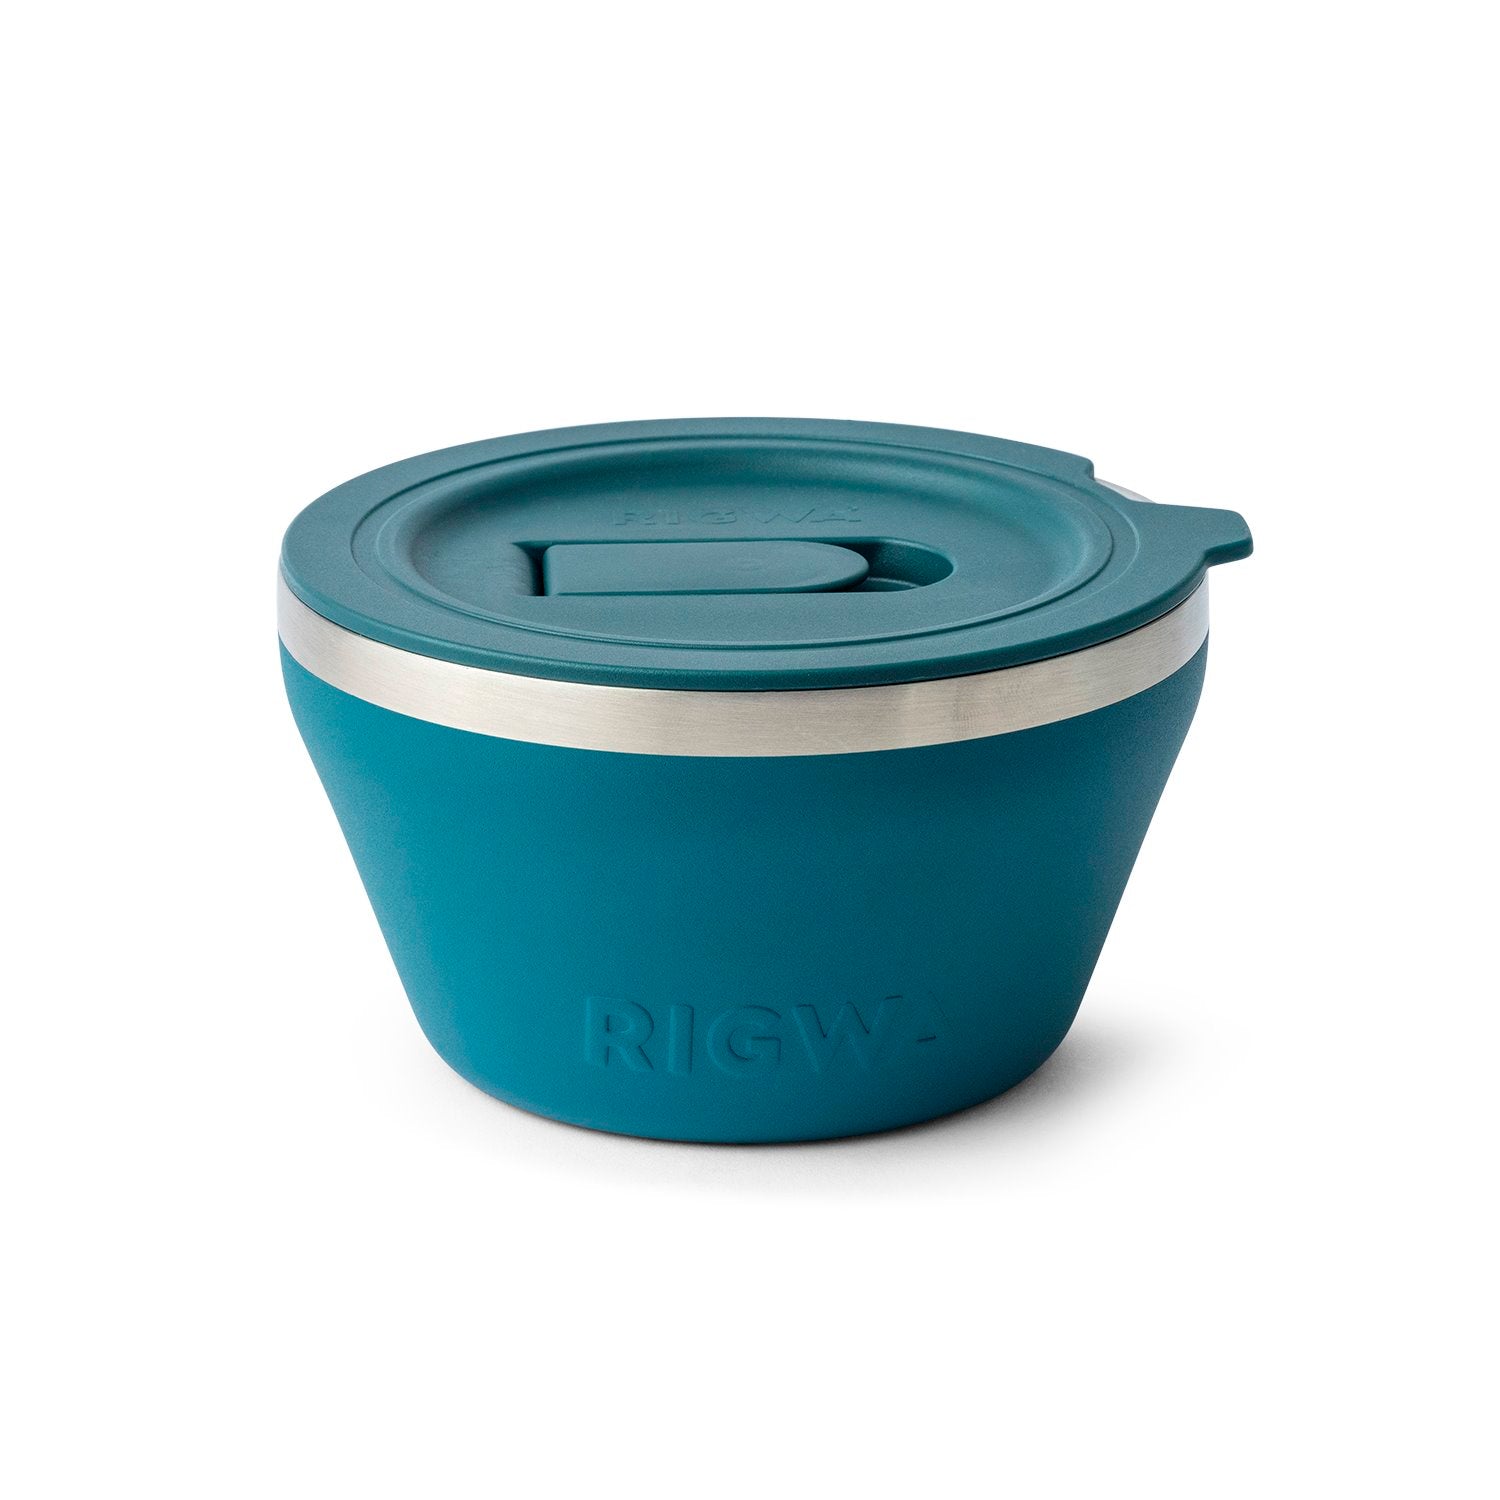 RIGWA- Dressing Containers